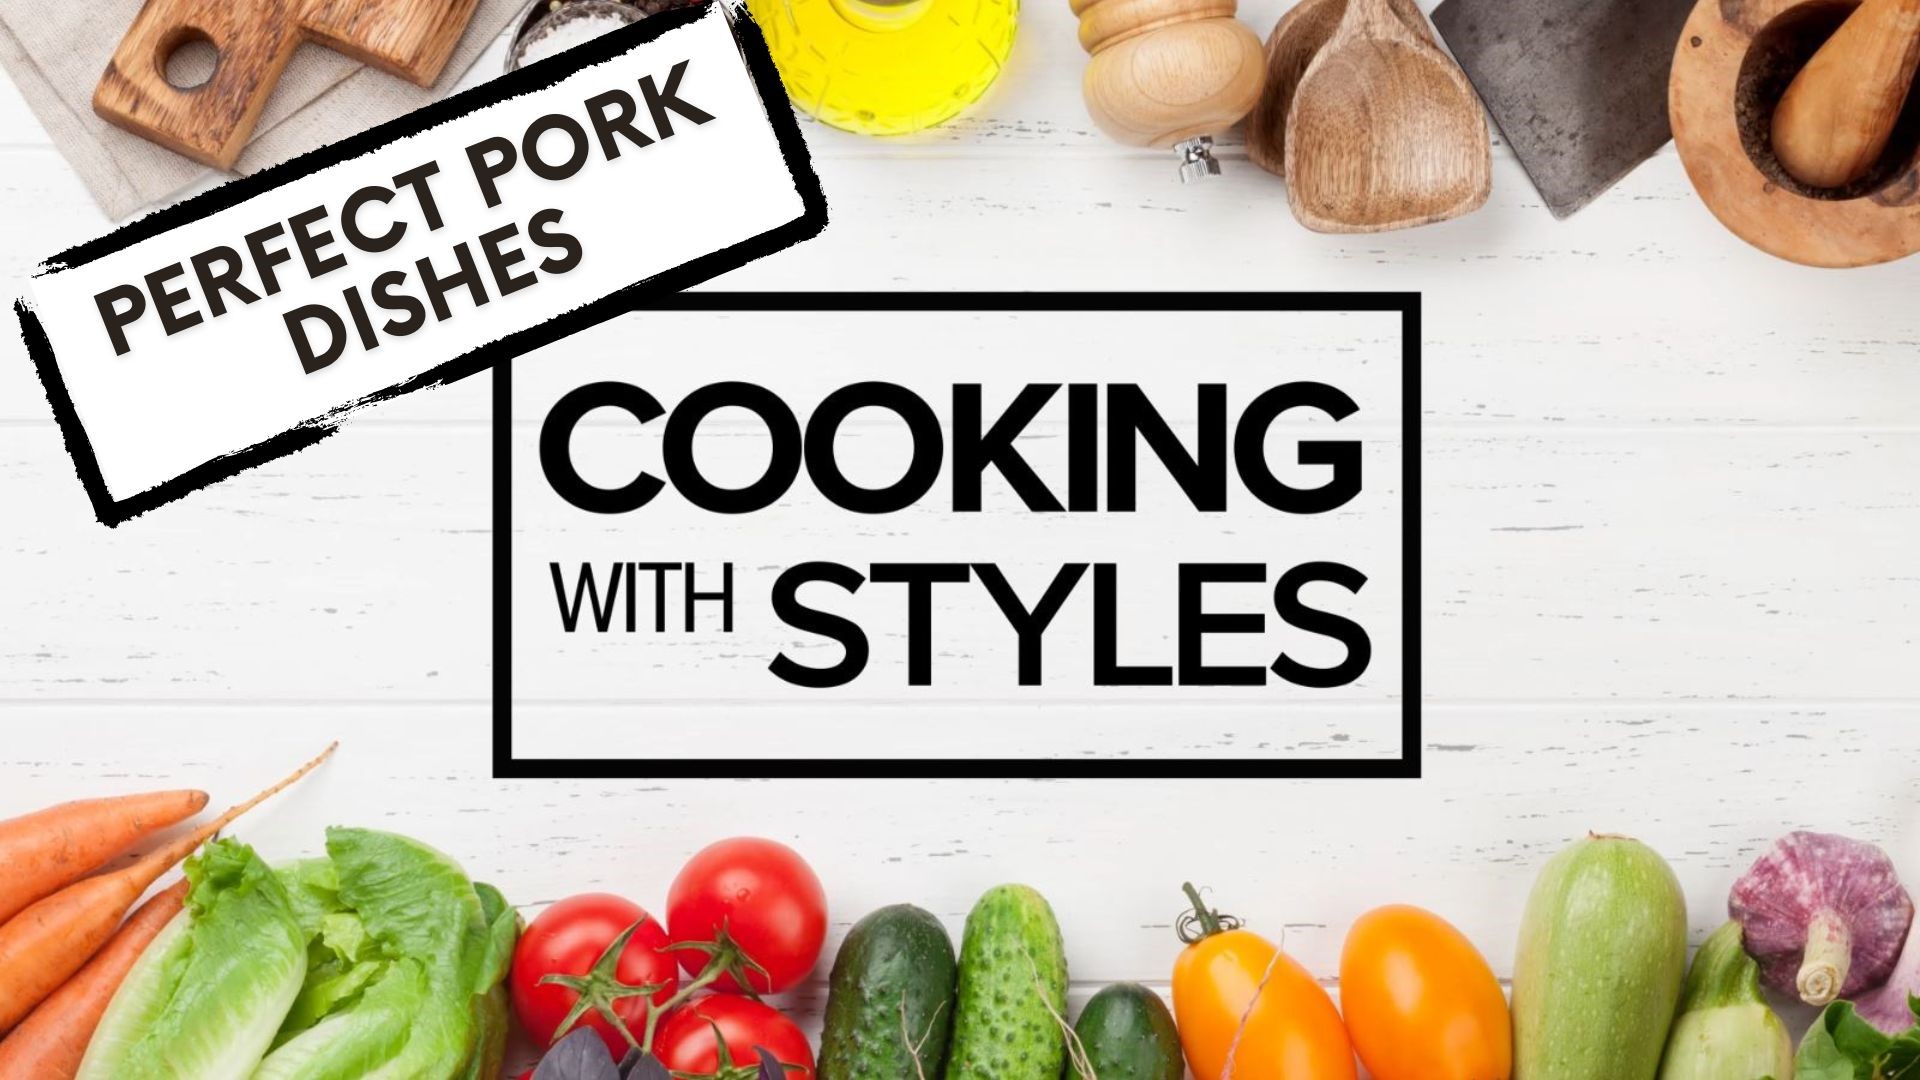 Shawn Styles shares his favorite pork dinner recipes that will get the whole family excited. From pork schnitzel to maple syrup pork chops, there is a dish for all.